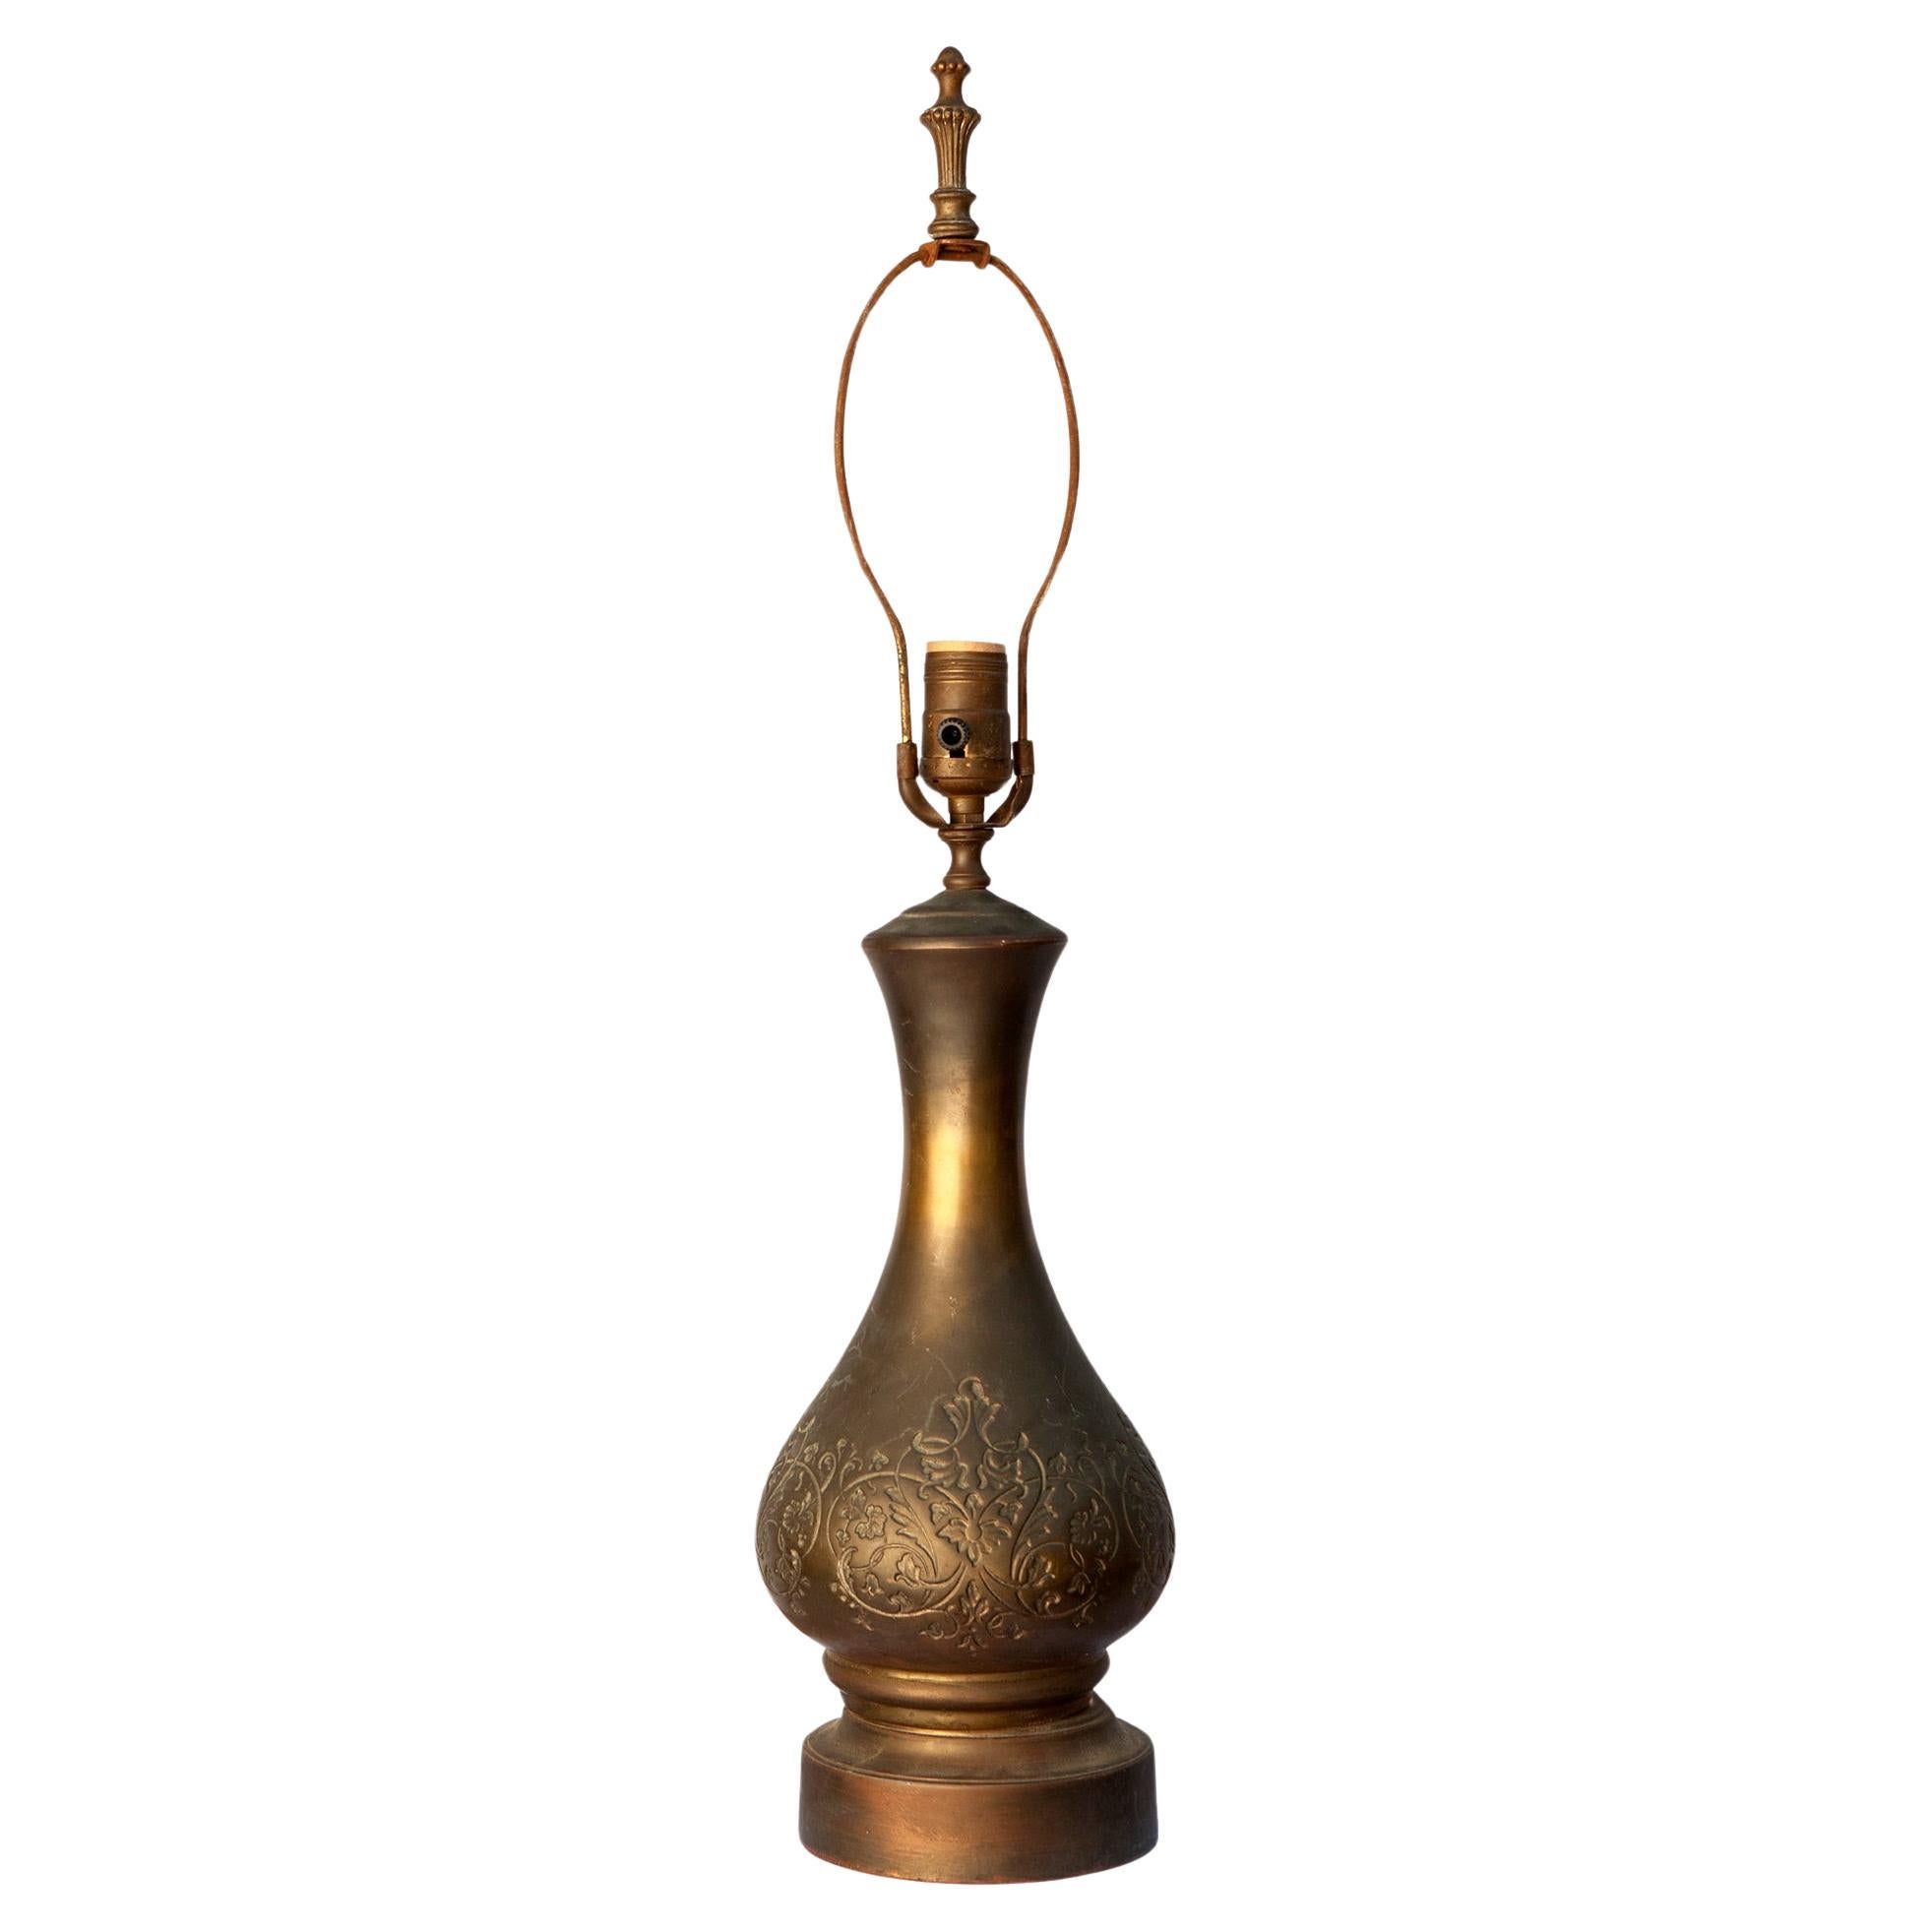 Stunning Indonesian etched brass/bronze vase converted to a lamp & mounted on a modern base. The barrel A-line shade in oatmeal has a stain at the top & is considered 